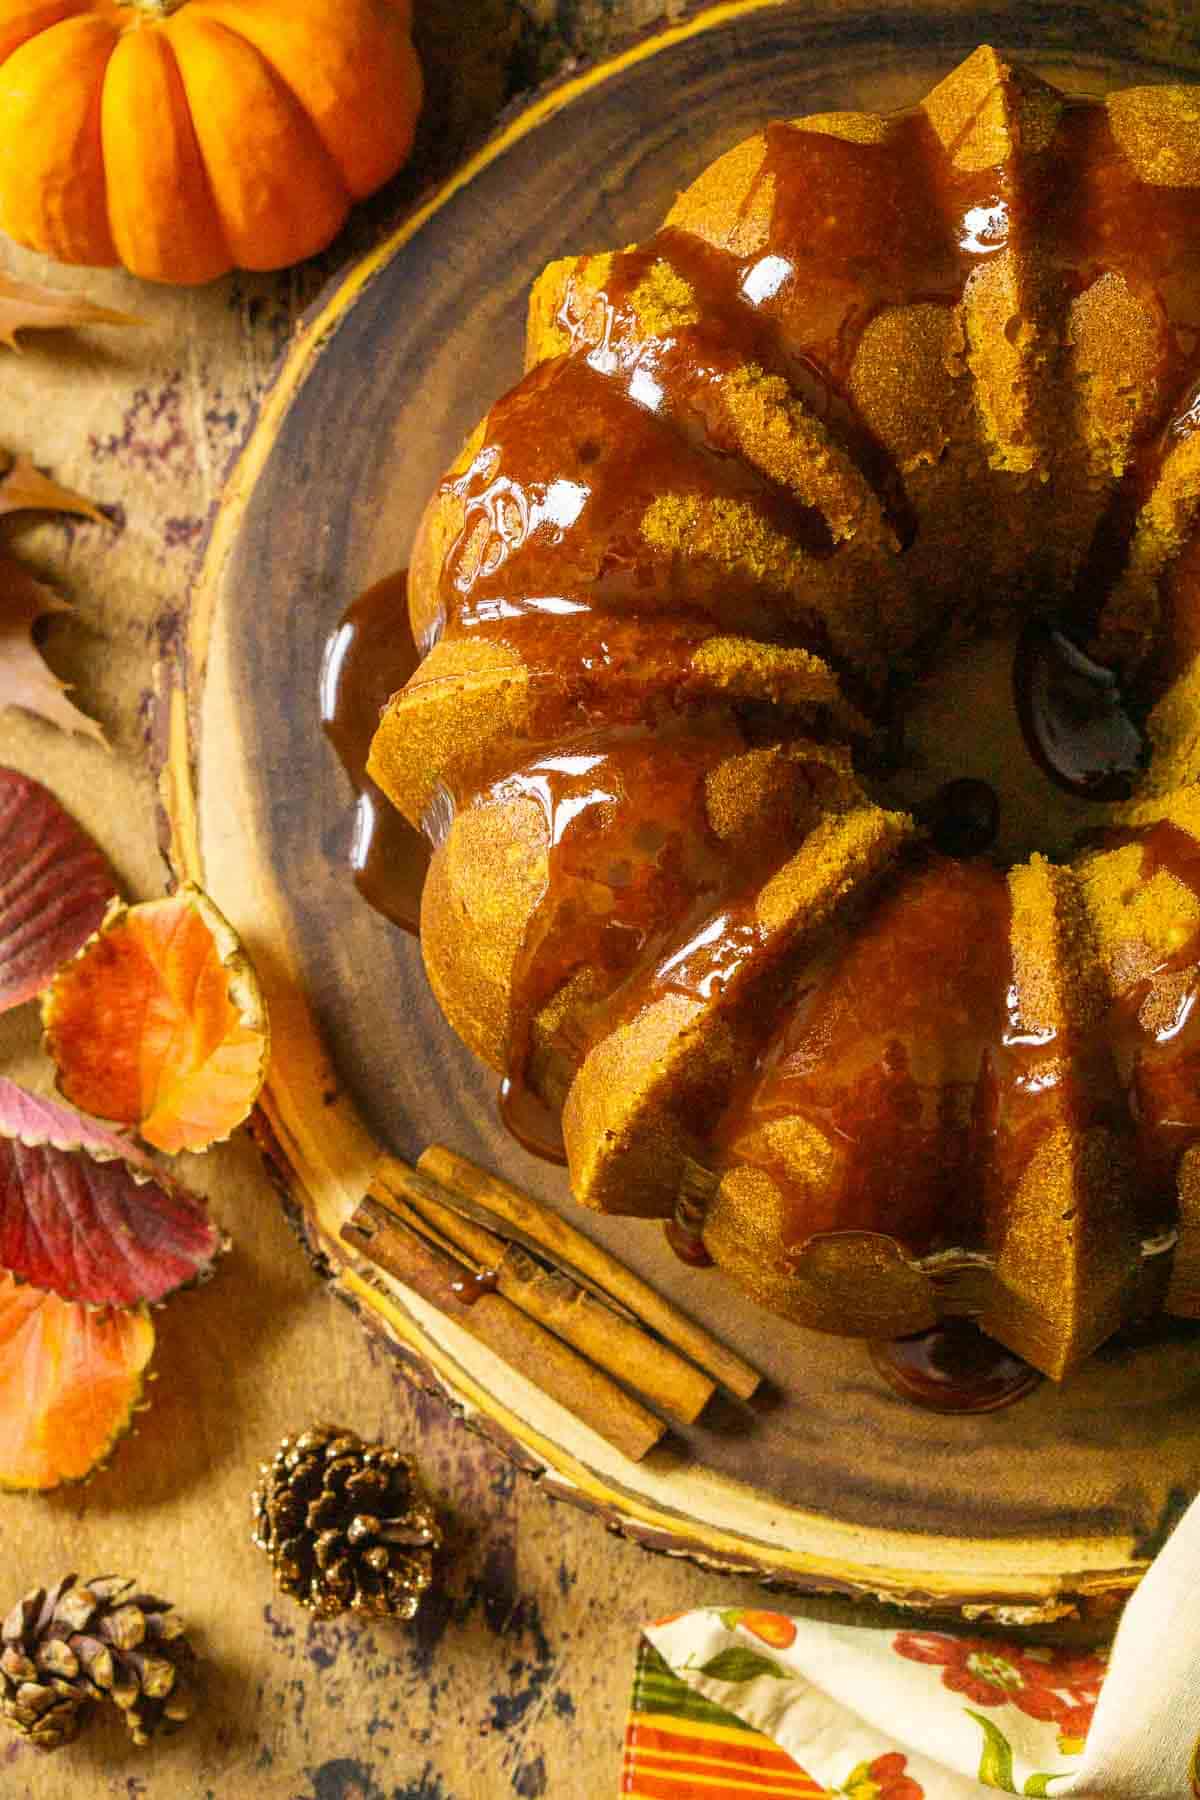 An aerial view of the pumpkin pound cake on a wooden platter with fall decor all around it on a wooden surface.